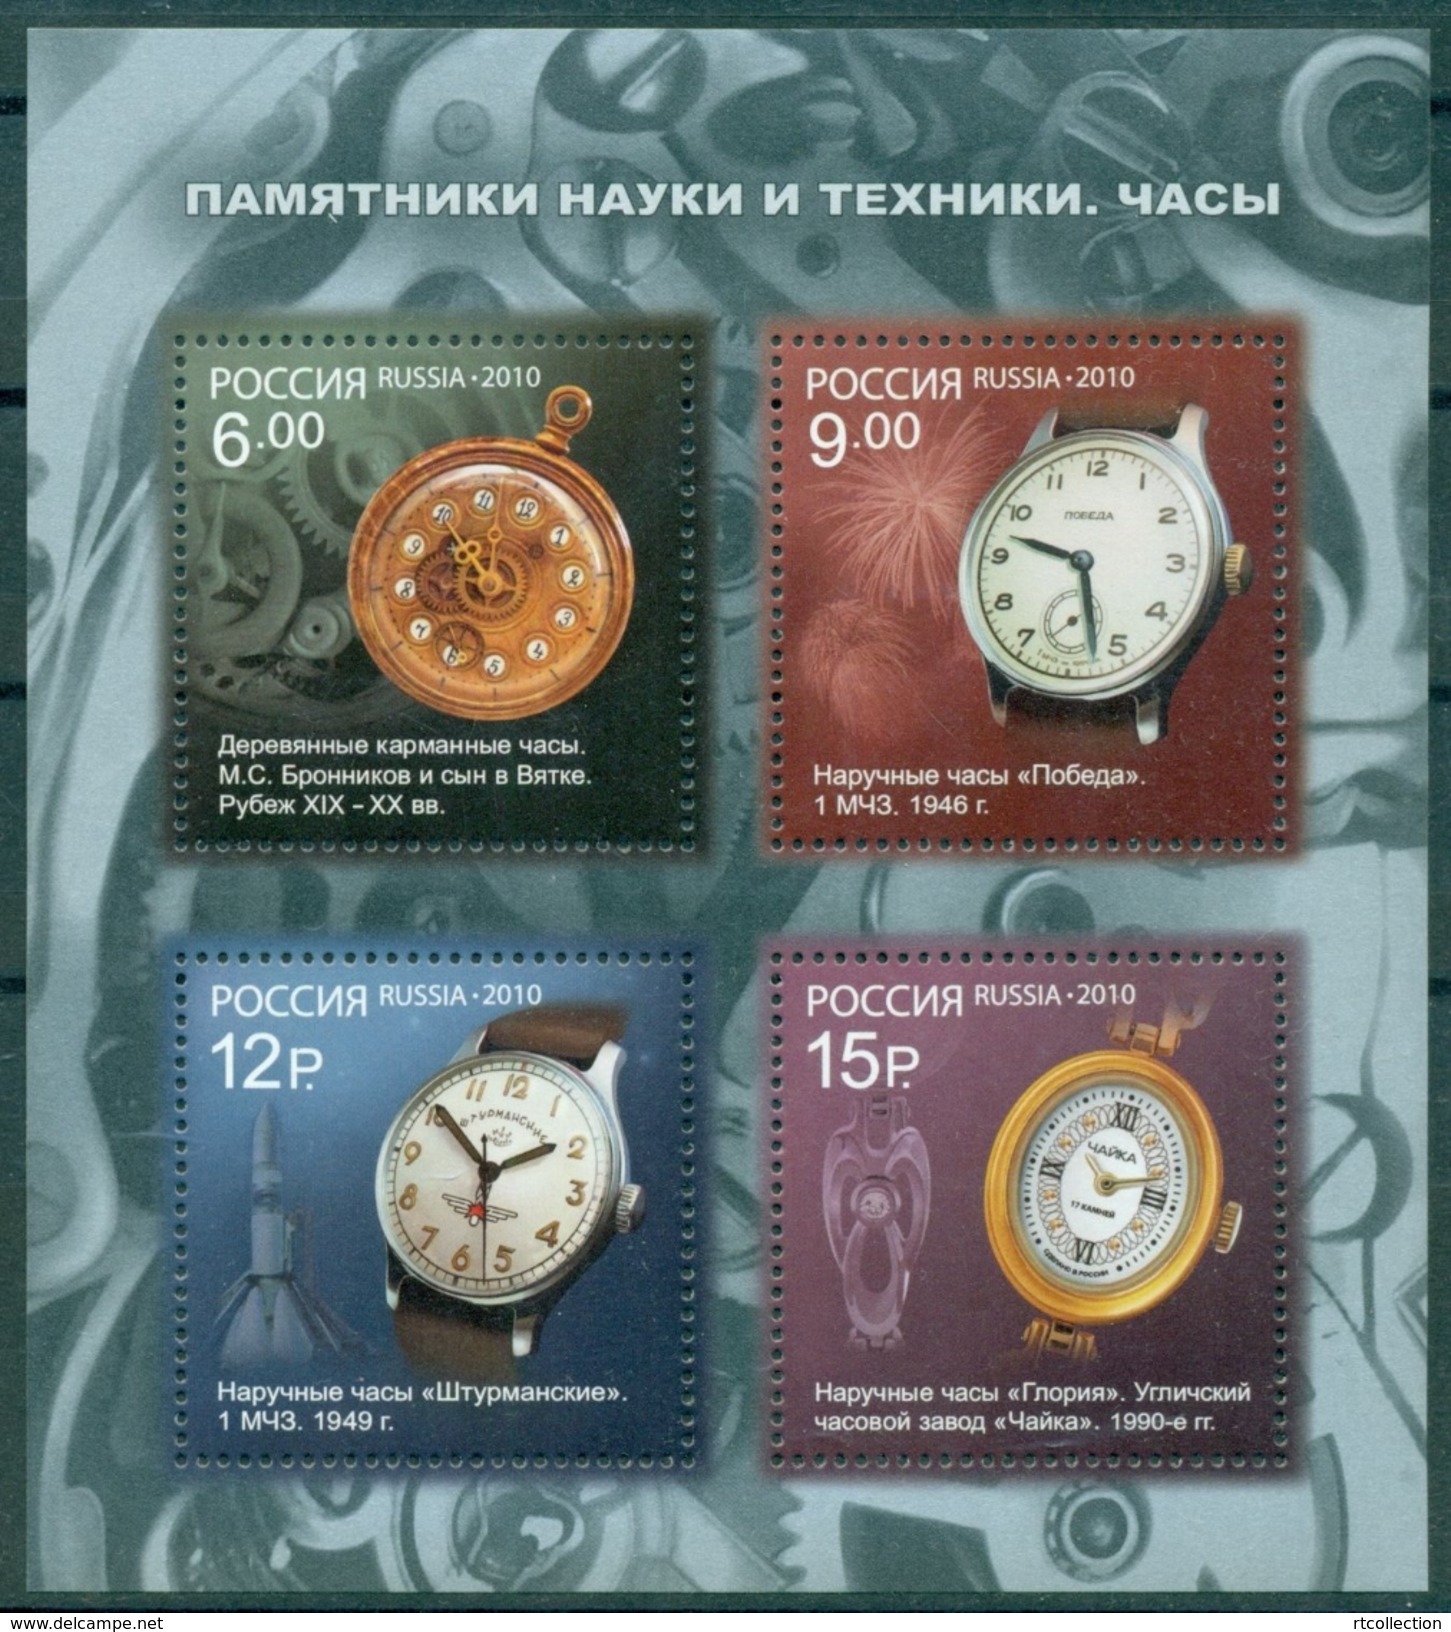 Russia 2010 Souvenir Pack FDC S/S Monuments Sciences Technology Watches Wrist Clock Artifact Stamps Michel BL134 SC 7216 - FDC